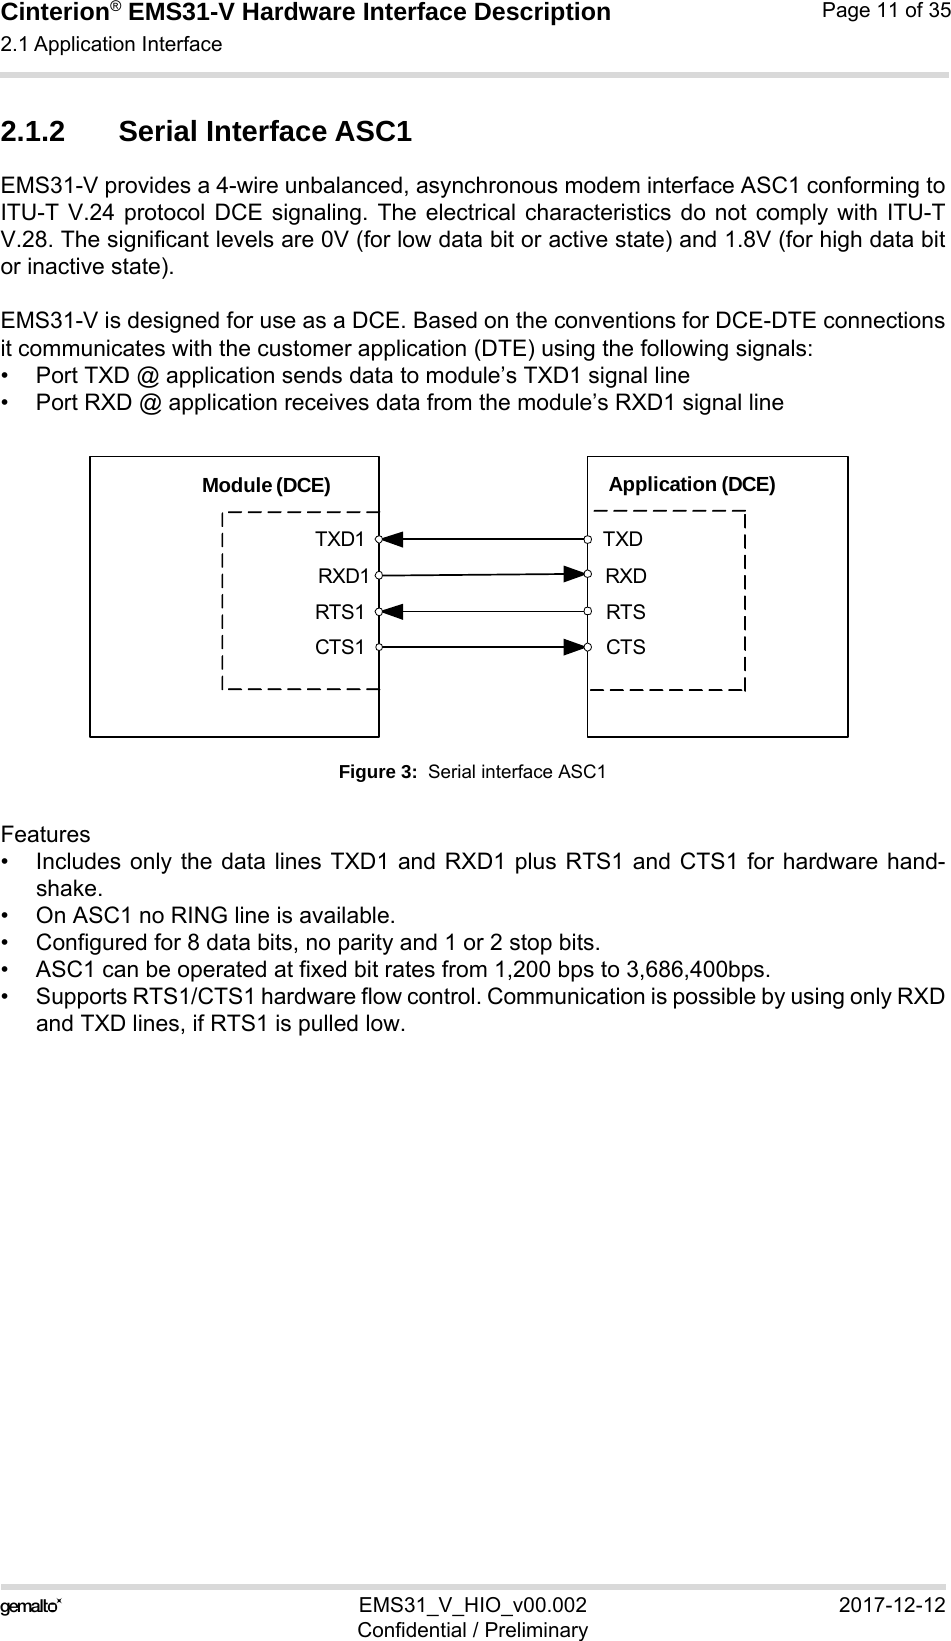 Cinterion® EMS31-V Hardware Interface Description2.1 Application Interface18EMS31_V_HIO_v00.002 2017-12-12Confidential / PreliminaryPage 11 of 352.1.2 Serial Interface ASC1EMS31-V provides a 4-wire unbalanced, asynchronous modem interface ASC1 conforming toITU-T V.24 protocol DCE signaling. The electrical characteristics do not comply with ITU-TV.28. The significant levels are 0V (for low data bit or active state) and 1.8V (for high data bitor inactive state).EMS31-V is designed for use as a DCE. Based on the conventions for DCE-DTE connectionsit communicates with the customer application (DTE) using the following signals:• Port TXD @ application sends data to module’s TXD1 signal line• Port RXD @ application receives data from the module’s RXD1 signal lineFigure 3:  Serial interface ASC1Features• Includes only the data lines TXD1 and RXD1 plus RTS1 and CTS1 for hardware hand-shake. • On ASC1 no RING line is available.• Configured for 8 data bits, no parity and 1 or 2 stop bits.• ASC1 can be operated at fixed bit rates from 1,200 bps to 3,686,400bps.• Supports RTS1/CTS1 hardware flow control. Communication is possible by using only RXDand TXD lines, if RTS1 is pulled low.TXD1RXD1RTS1CTS1TXDRXDRTSCTSModule (DCE) Application (DCE)